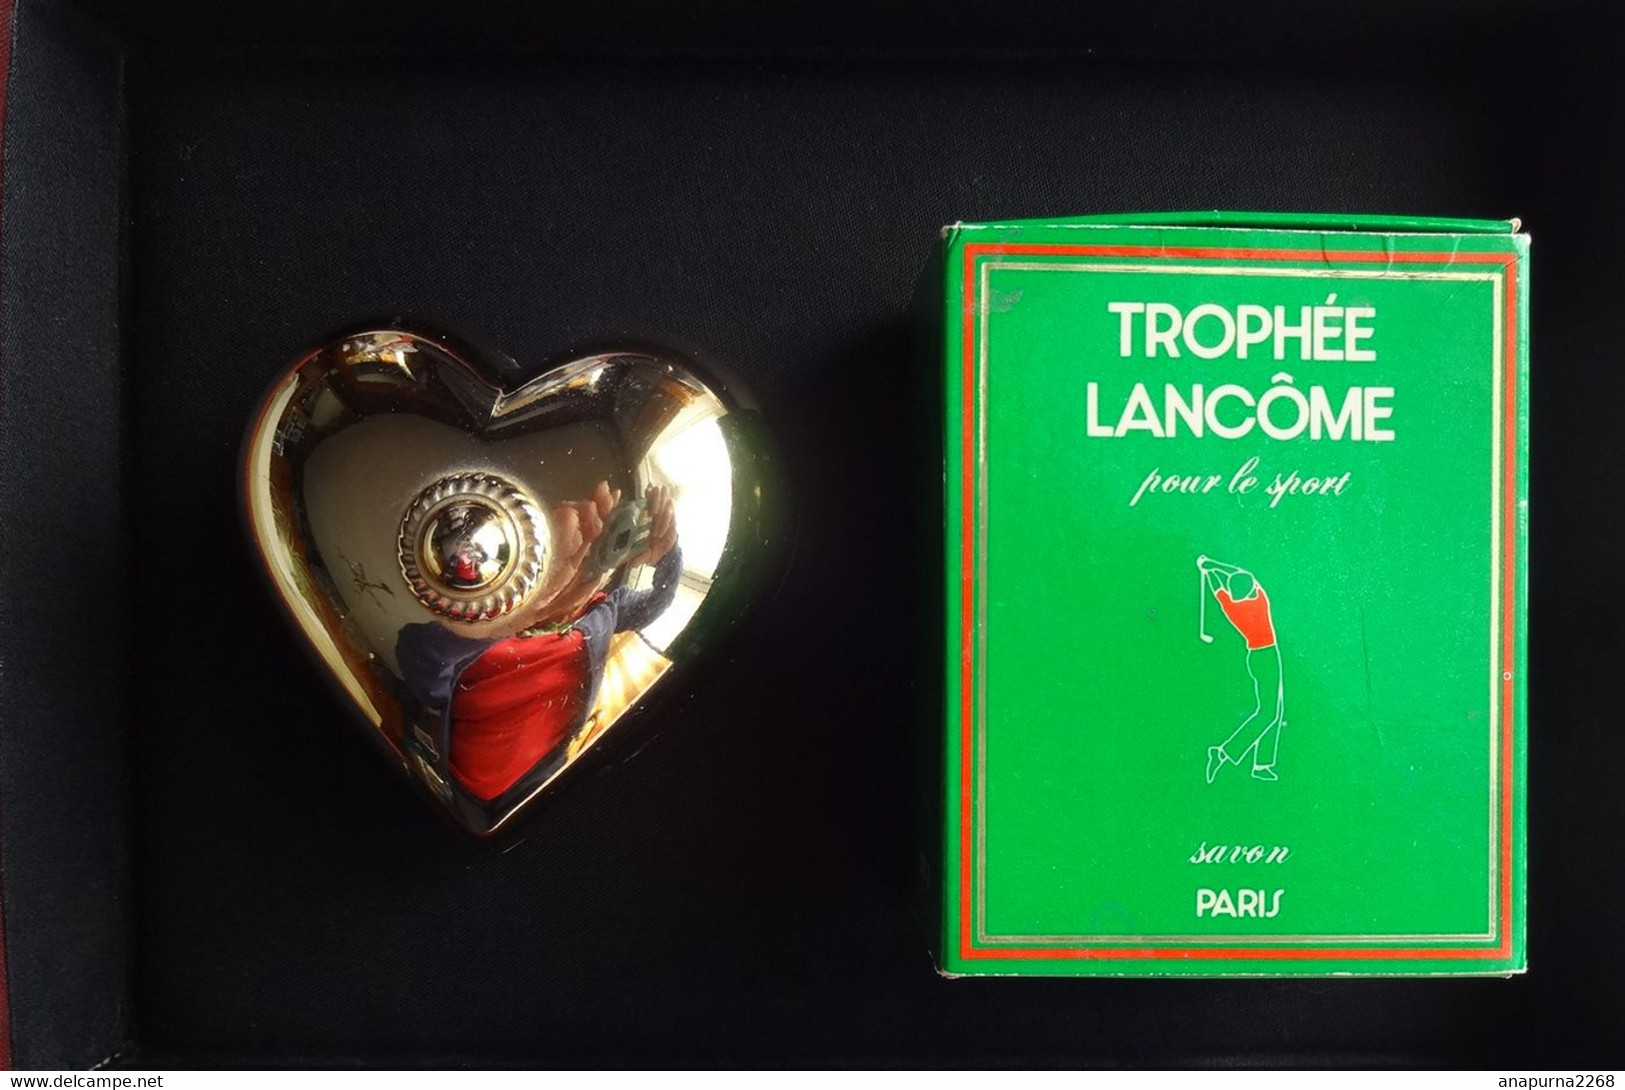 2 SAVONS MINIATURES...TROPHEE LANCOME POUR LE GOLF......MOSCHINO - Beauty Products